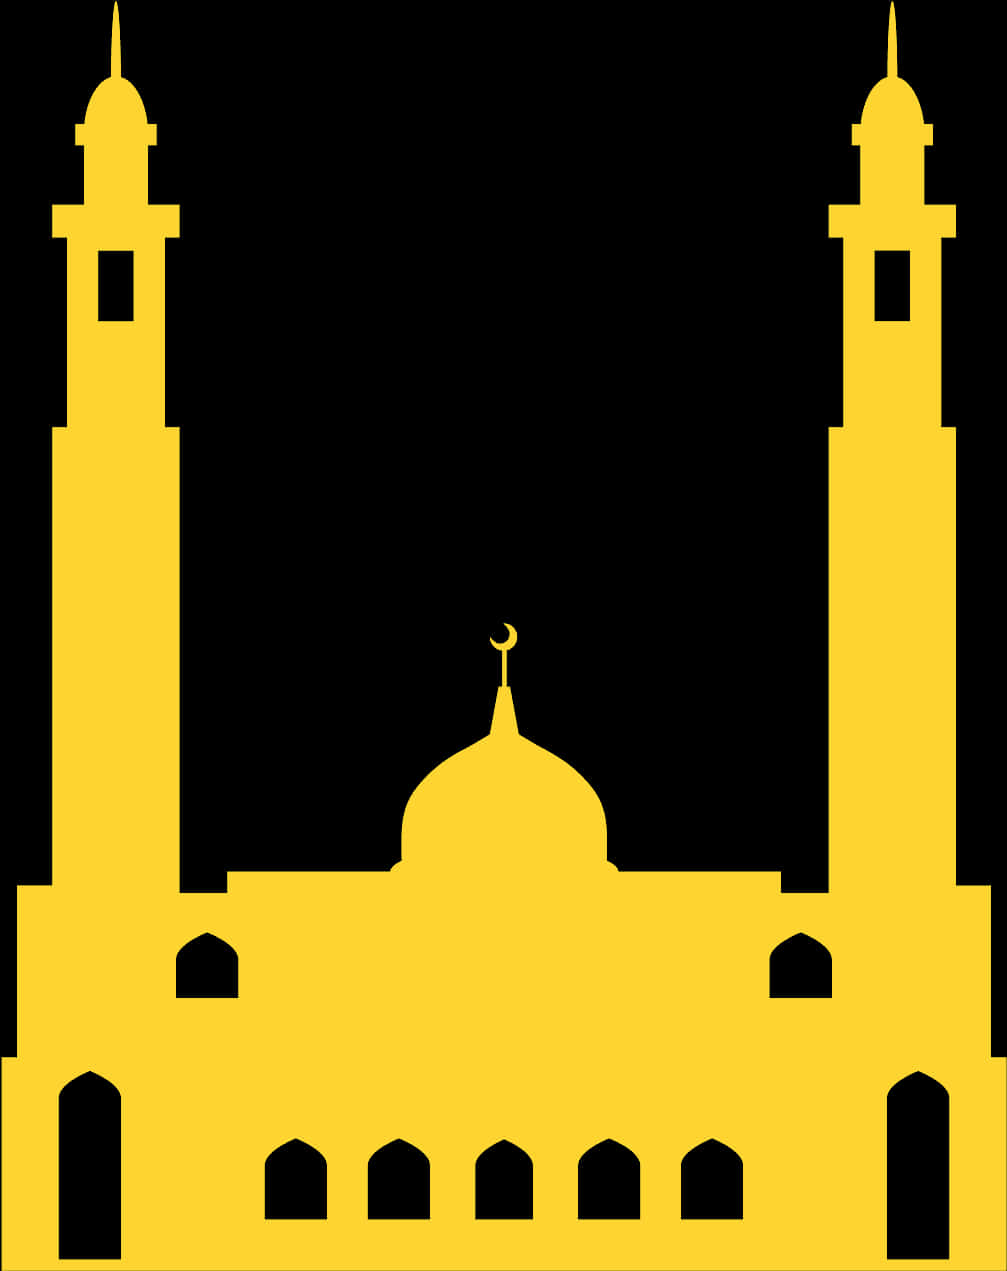 A Yellow Building With Towers And A Crescent Moon